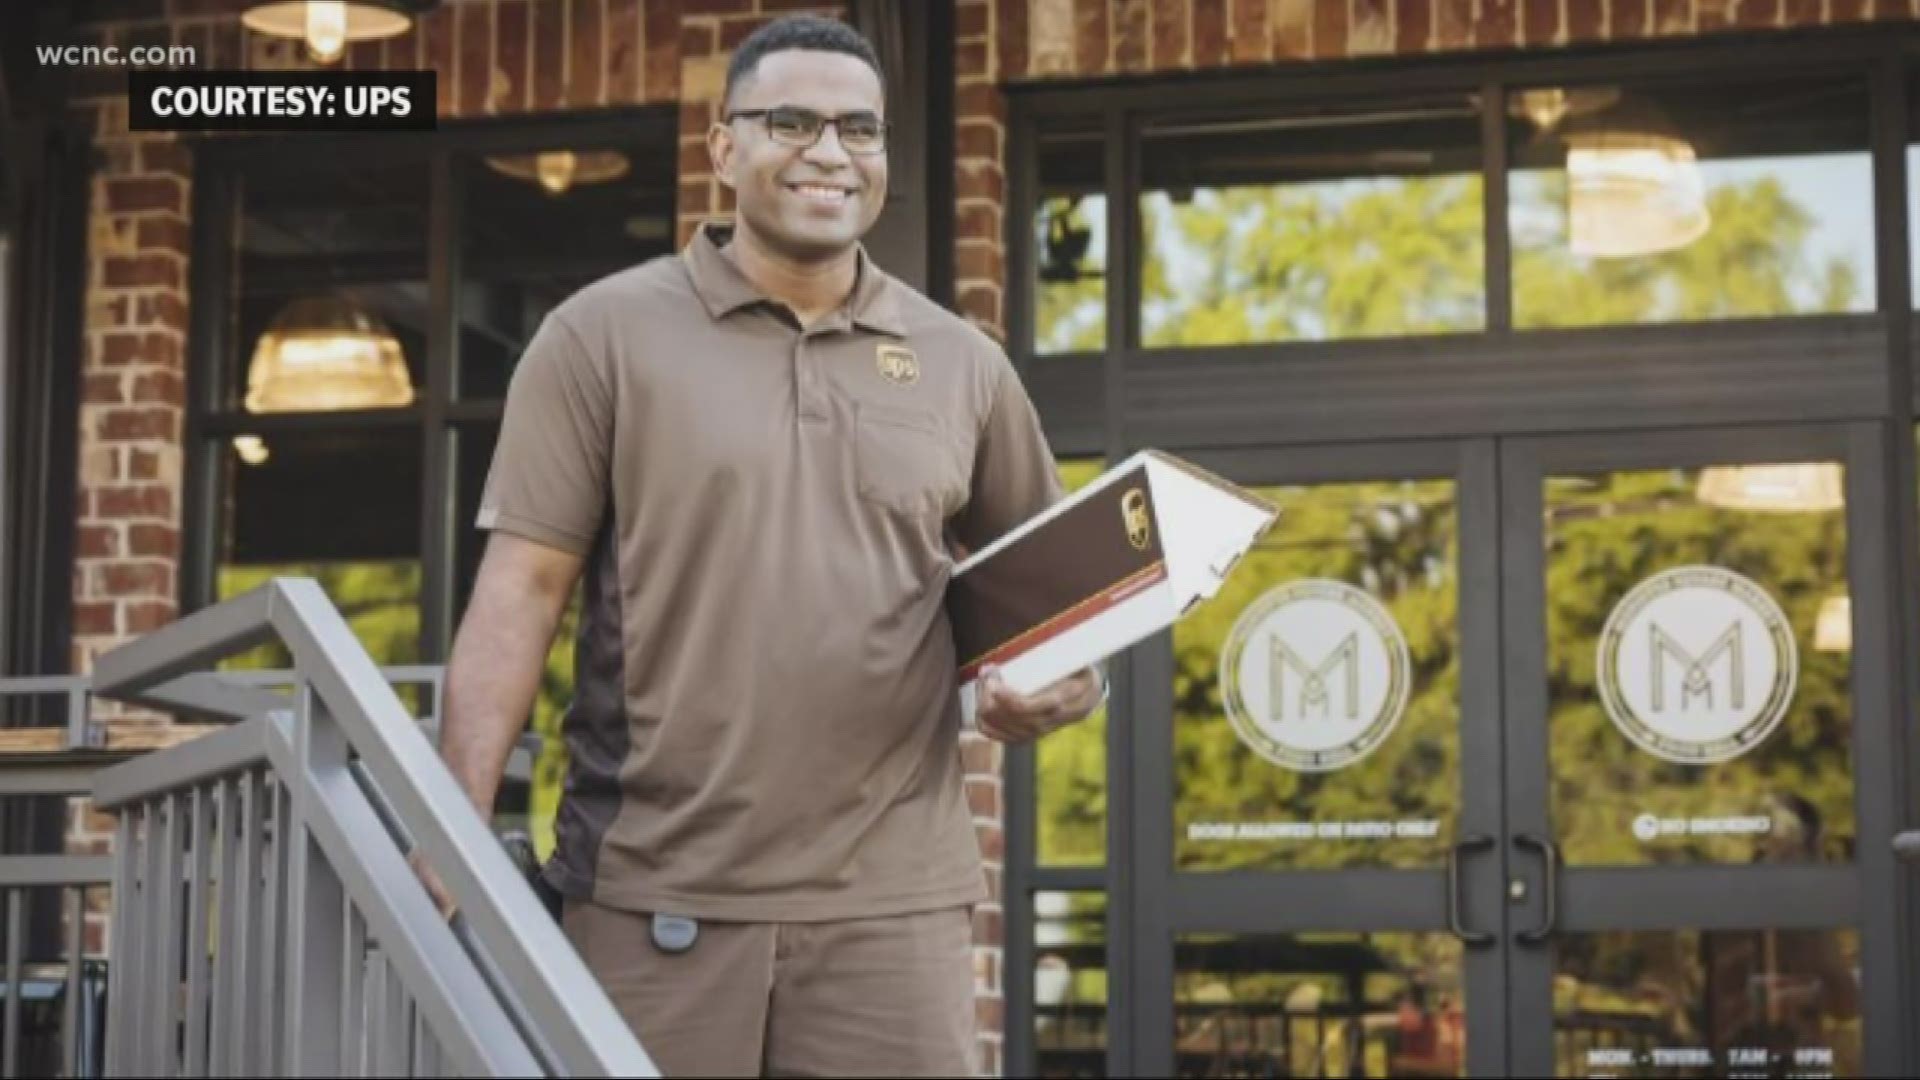 UPS uniforms are undergoing their biggest change since drivers were allowed to start wearing shorts in the 1990s.